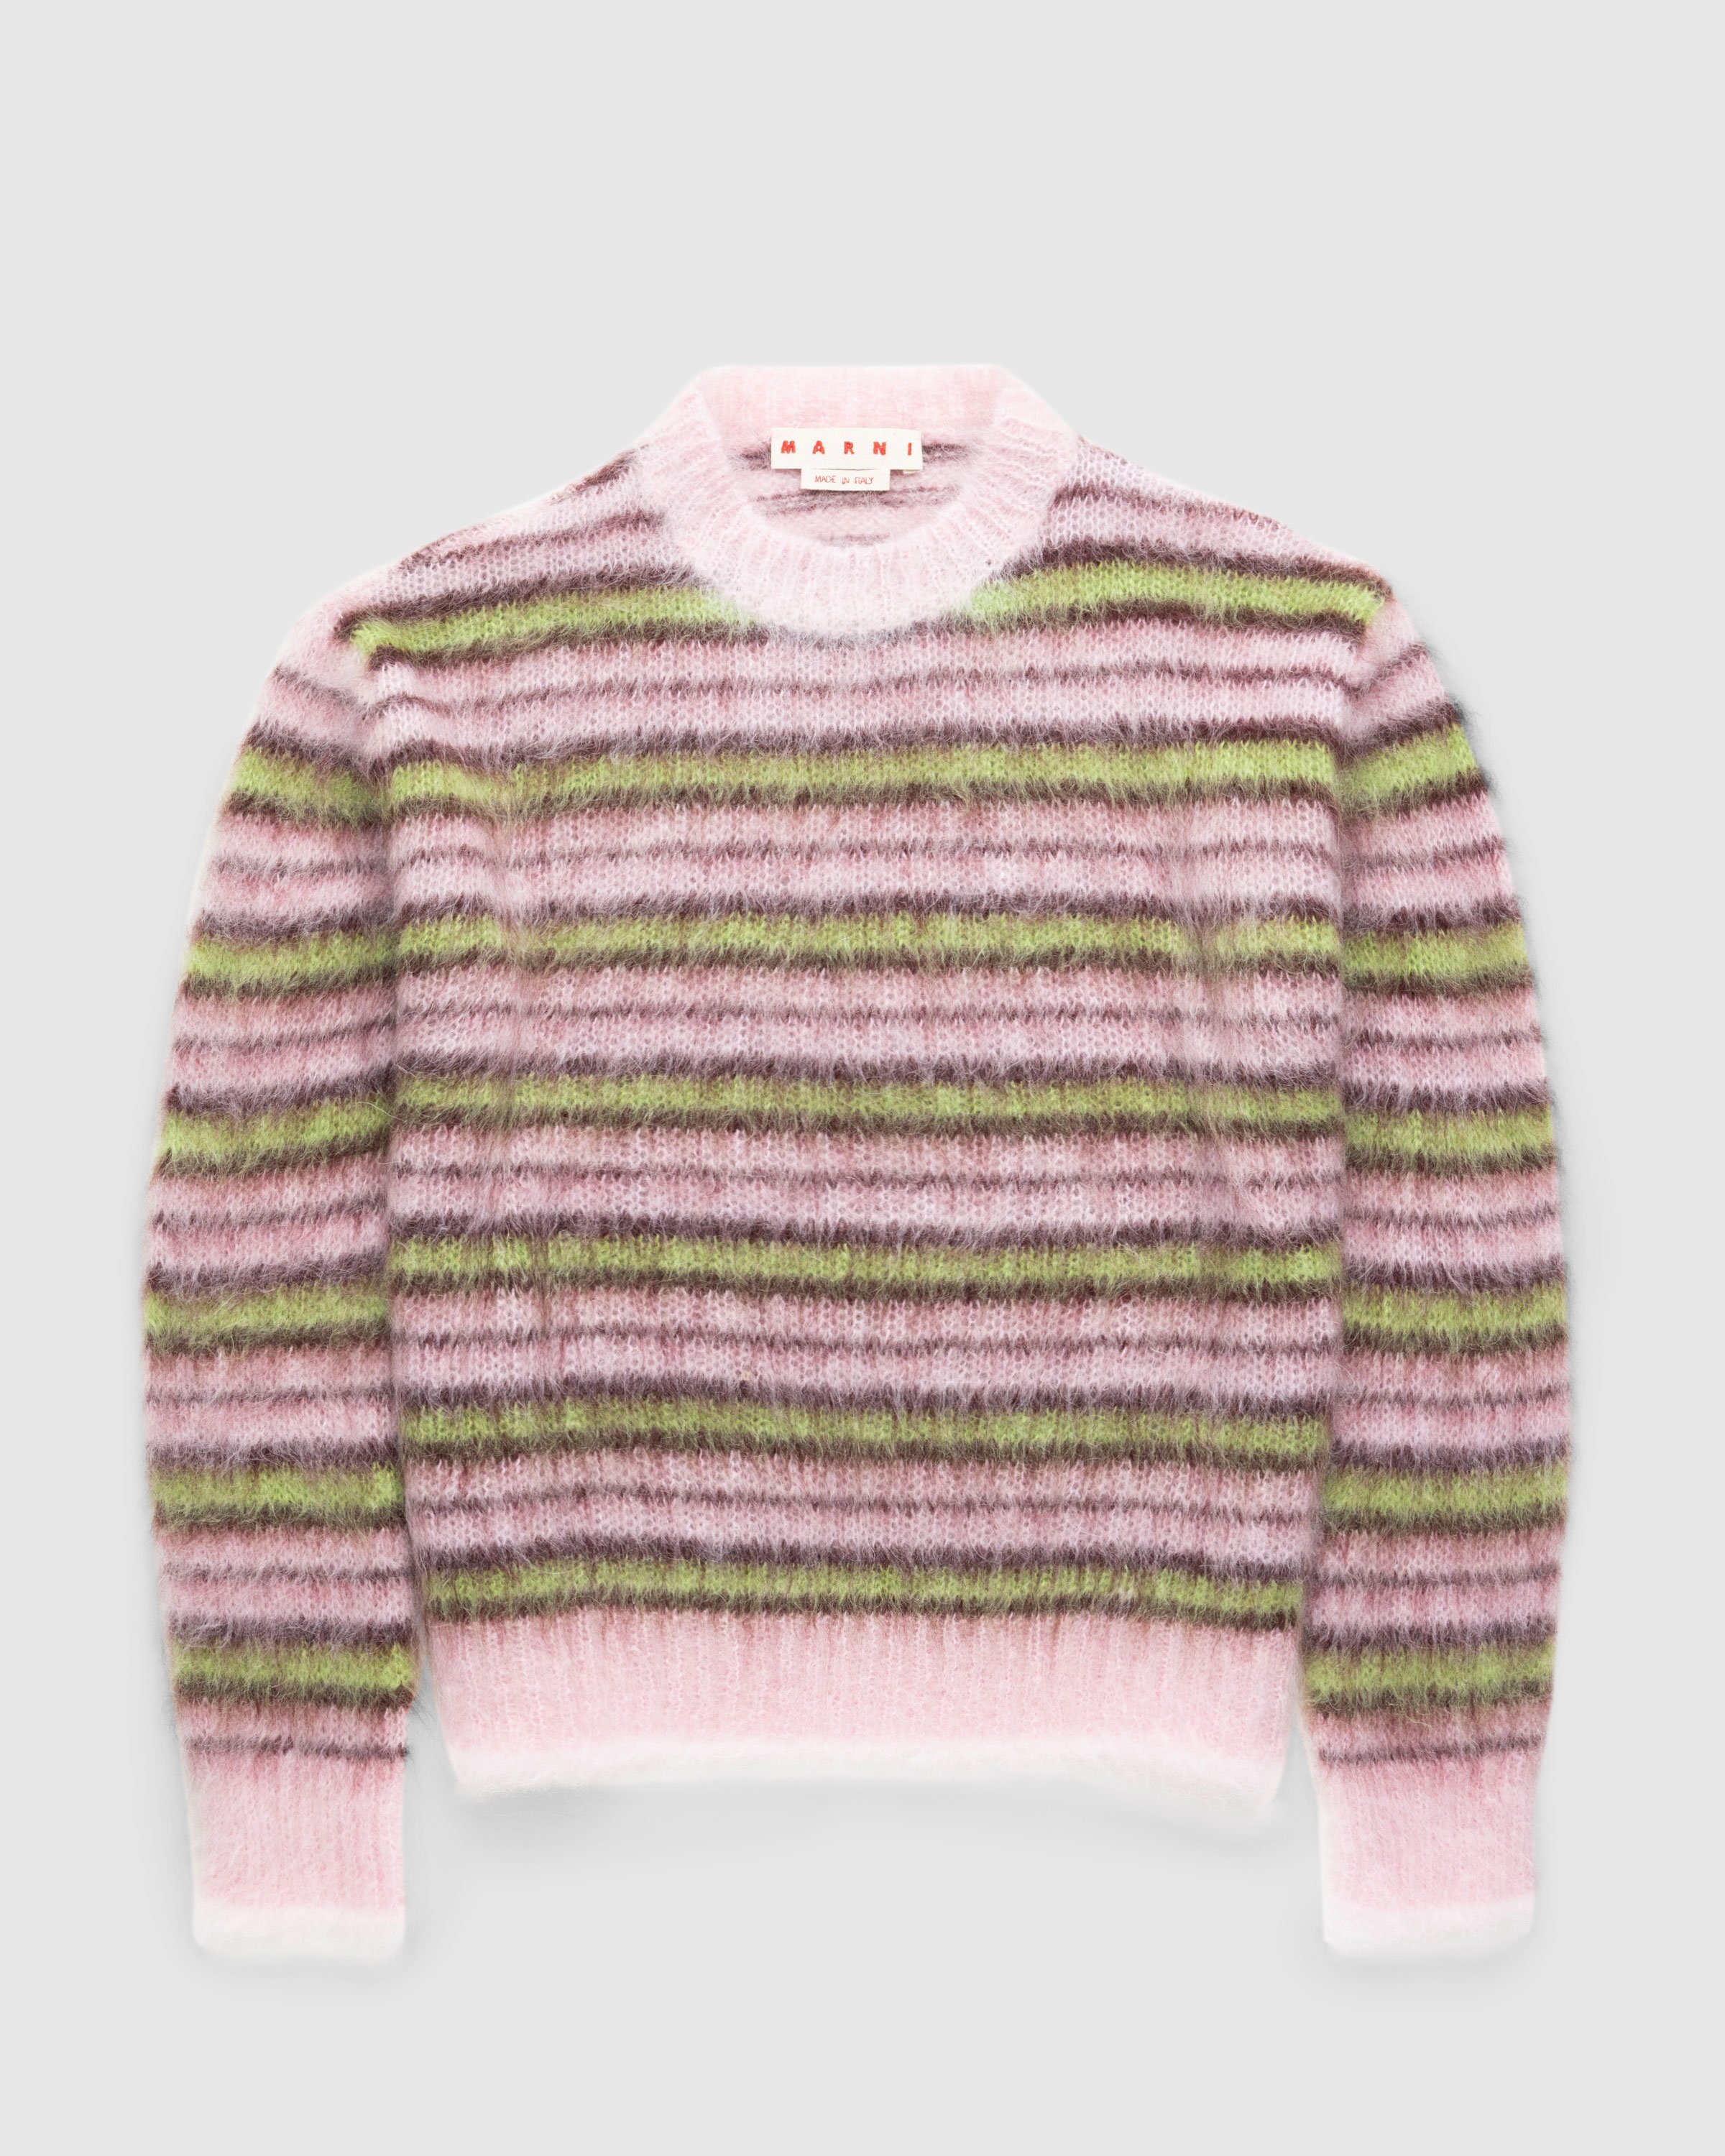 Marni - Striped Mohair Sweater Multi - Clothing - Pink - Image 1